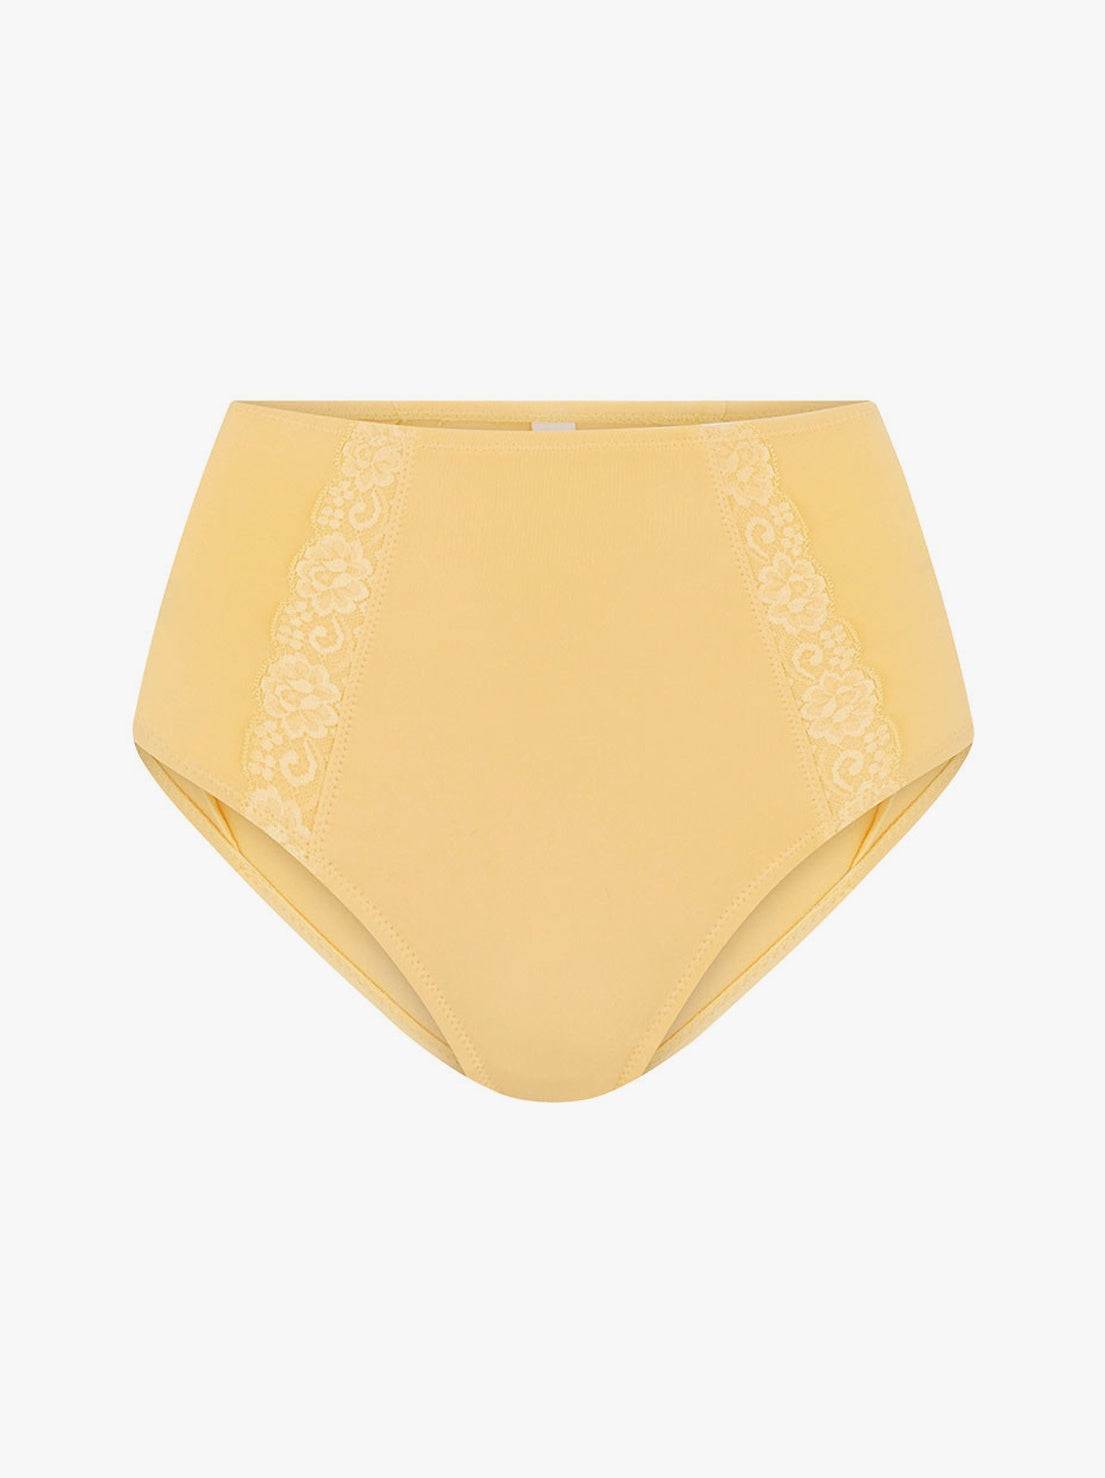 Spell - Boudoir Lace High Waisted Bloomers - Honey